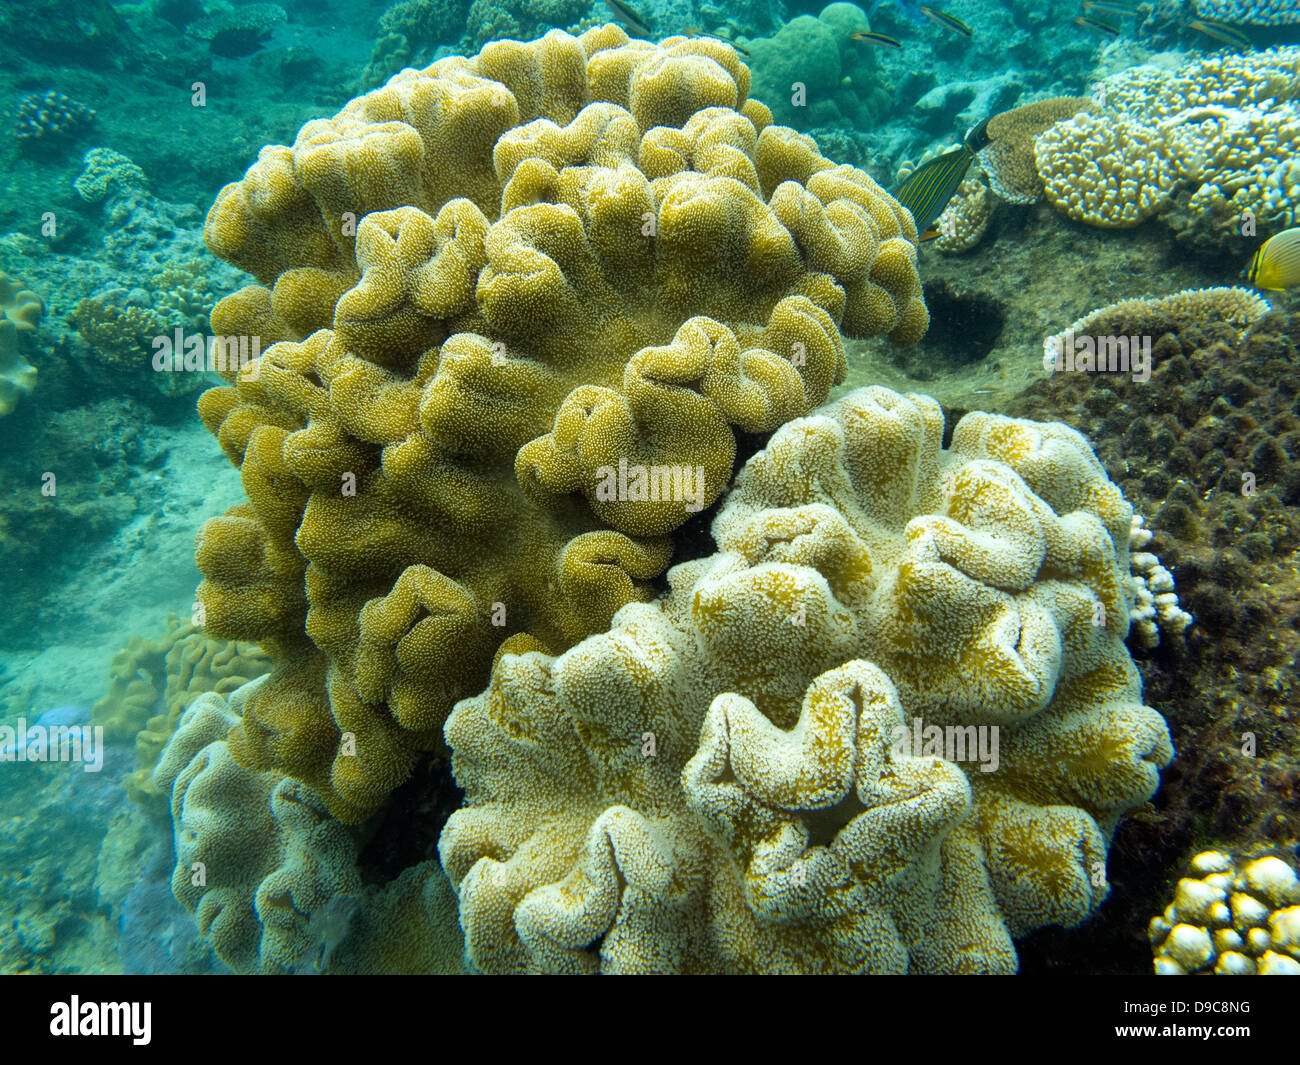 Coral formations, The Great Barrier Reef, Queensland, Australia Stock Photo